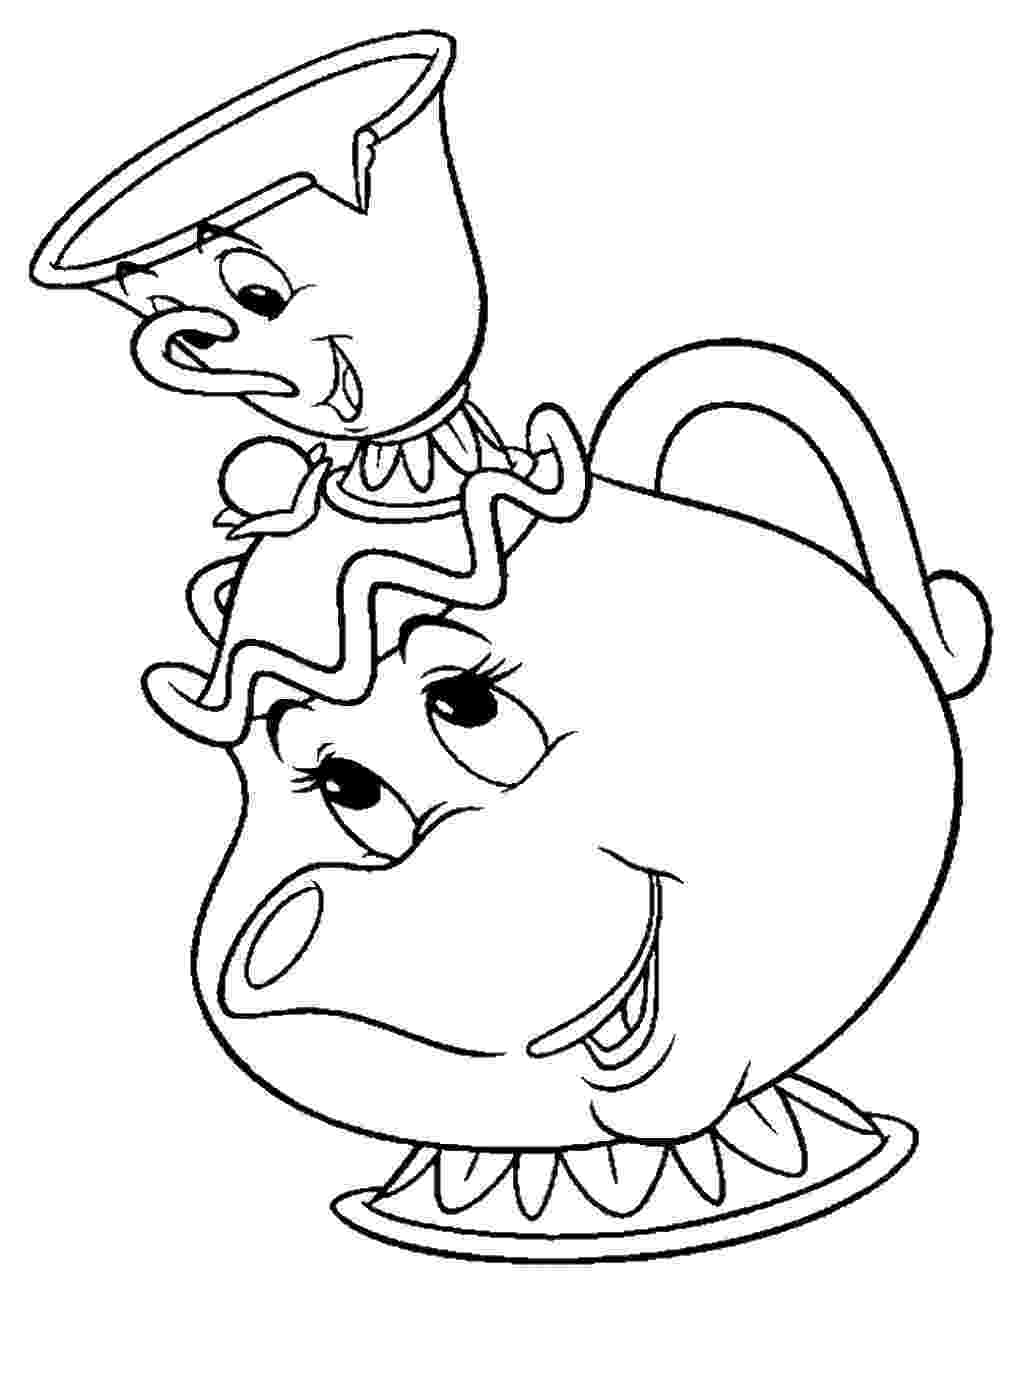 beauty and the beast coloring pages beauty and the beast coloring pages 2 disney coloring book and beauty beast the pages coloring 